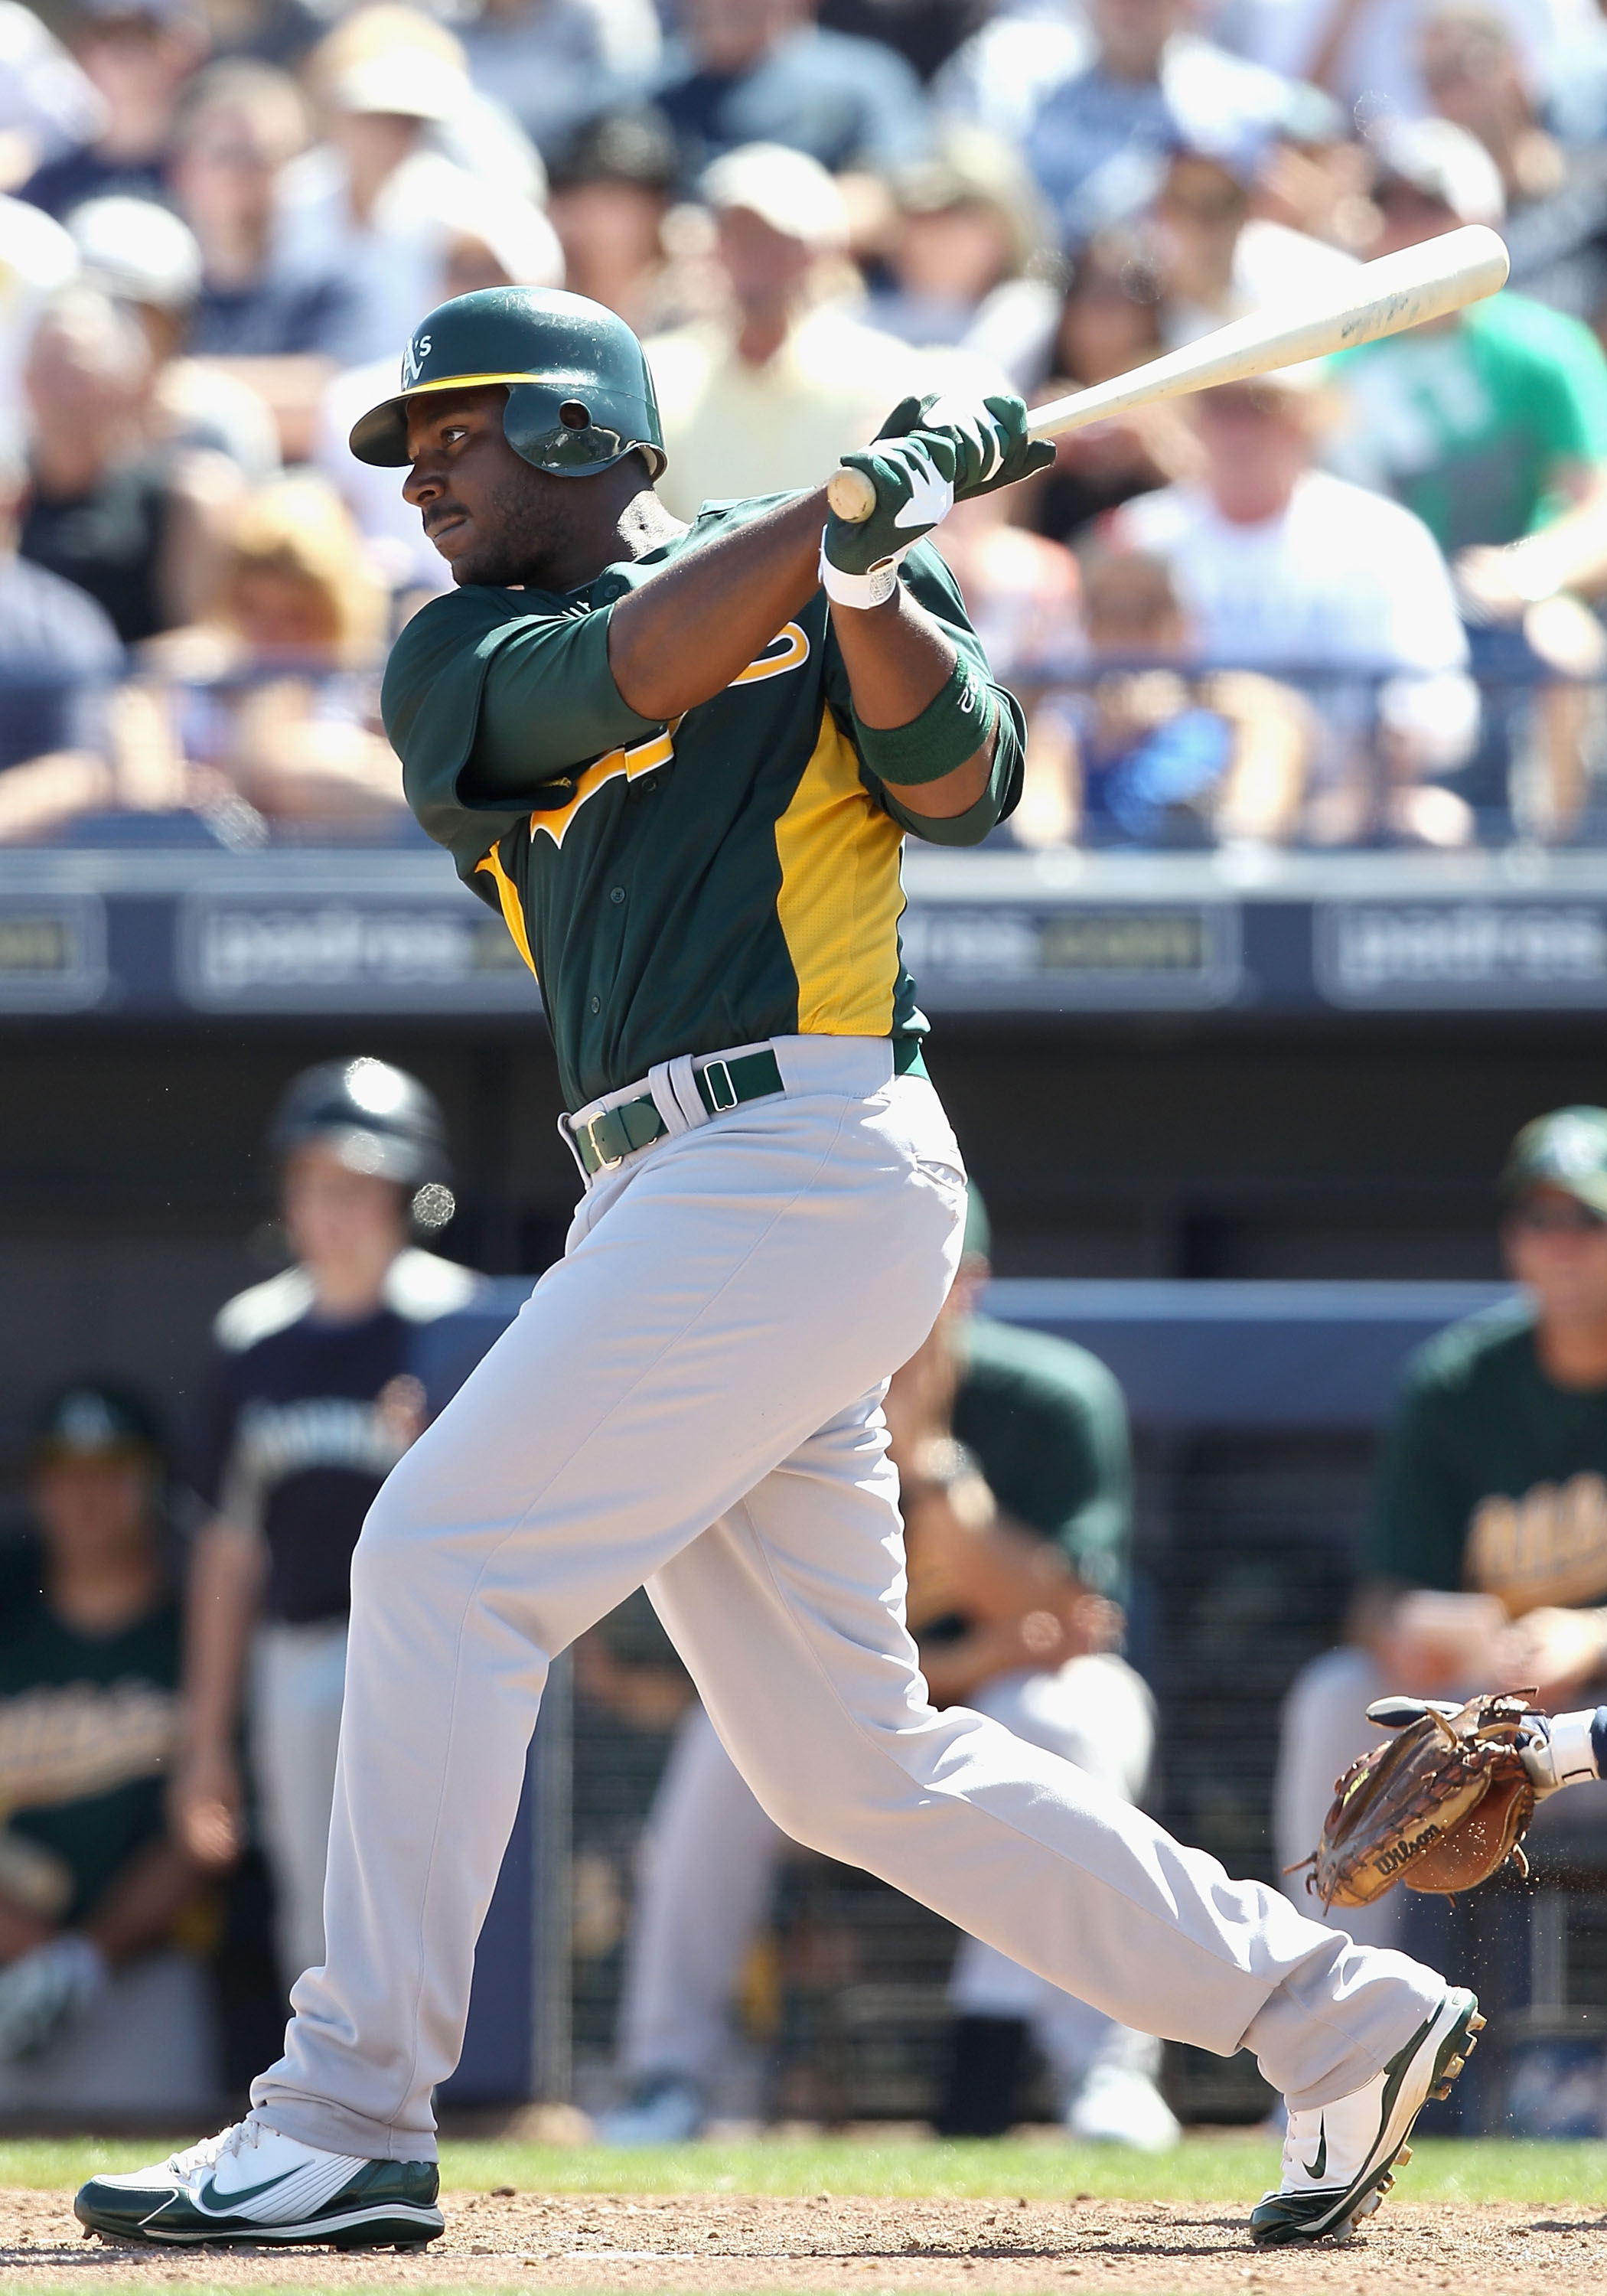 PEORIA, AZ - MARCH 12:  Chris Carter #22 of the Oakland Athletics hits a RBI single against the Seattle Mariners during the second inning of the spring training game at Peoria Stadium on March 12, 2011 in Peoria, Arizona.  (Photo by Christian Petersen/Get